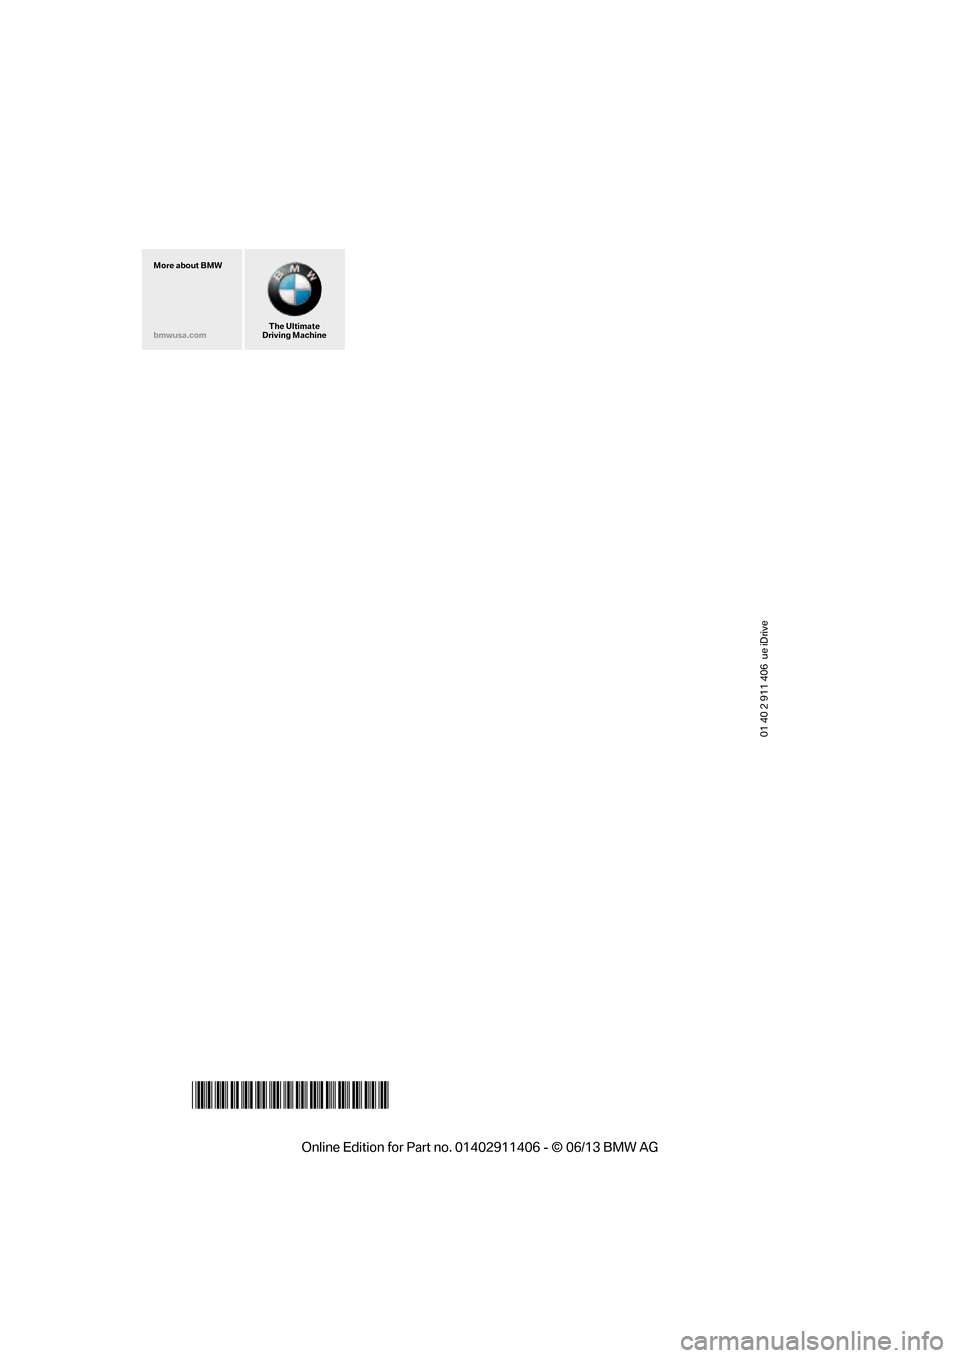 BMW M3 COUPE 2013 E92 Owners Manual 01 40 2 911 406  ue iDrive
*BL291140600V*
The Ultimate
Driving Machine
More about BMW
bmwusa.com

00320051004F004C00510048000300280047004C0057004C005200510003  